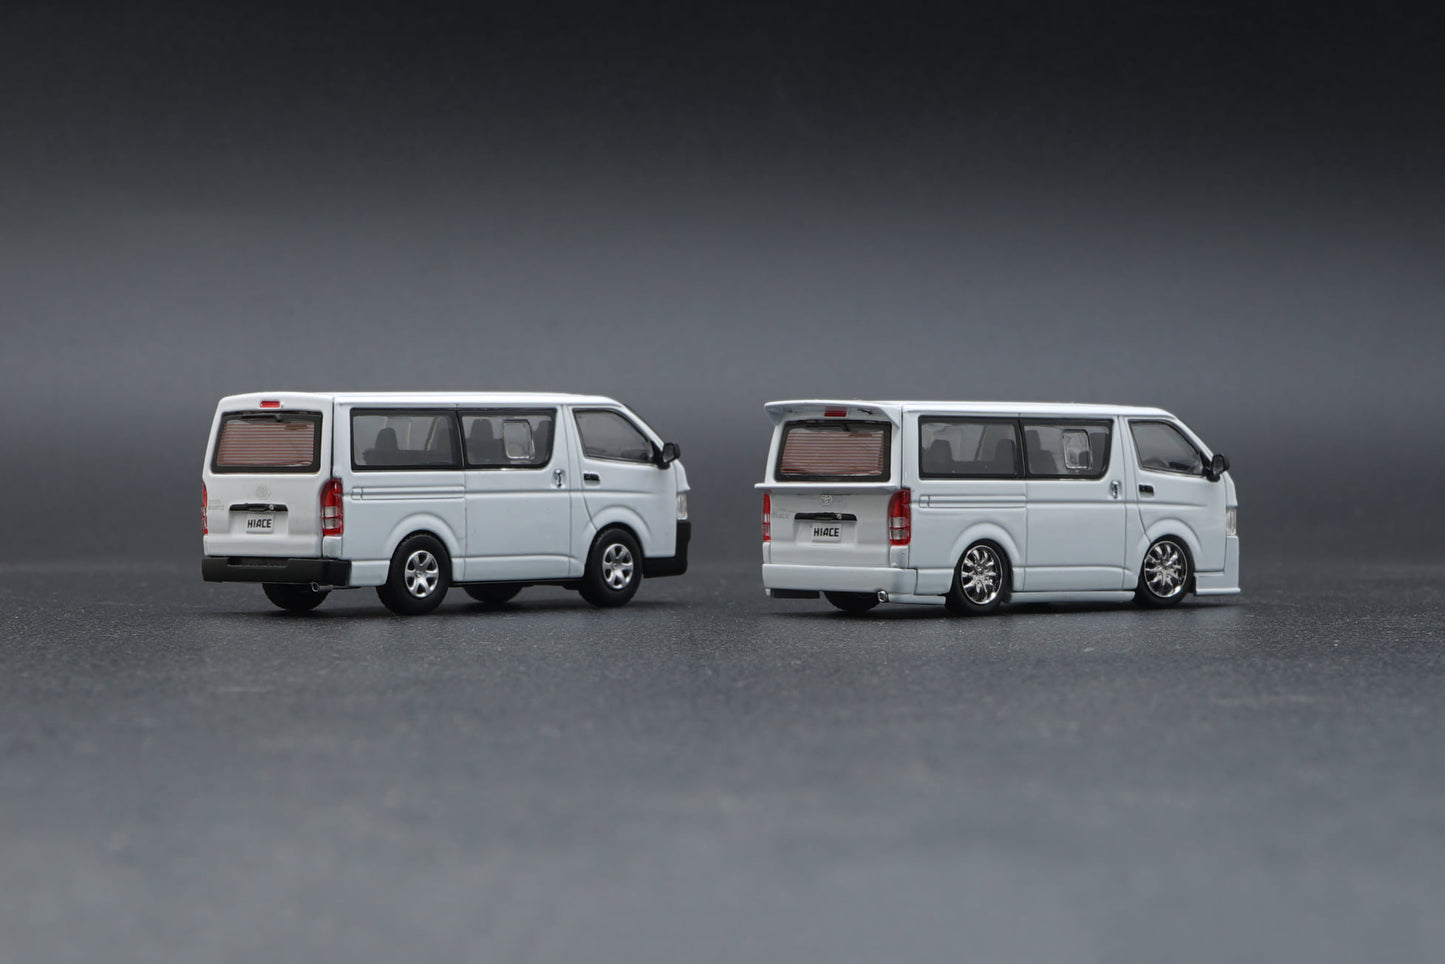 BM Creations 1:64 Toyota 2016 Hiace White RHD (with interchangeable parts)